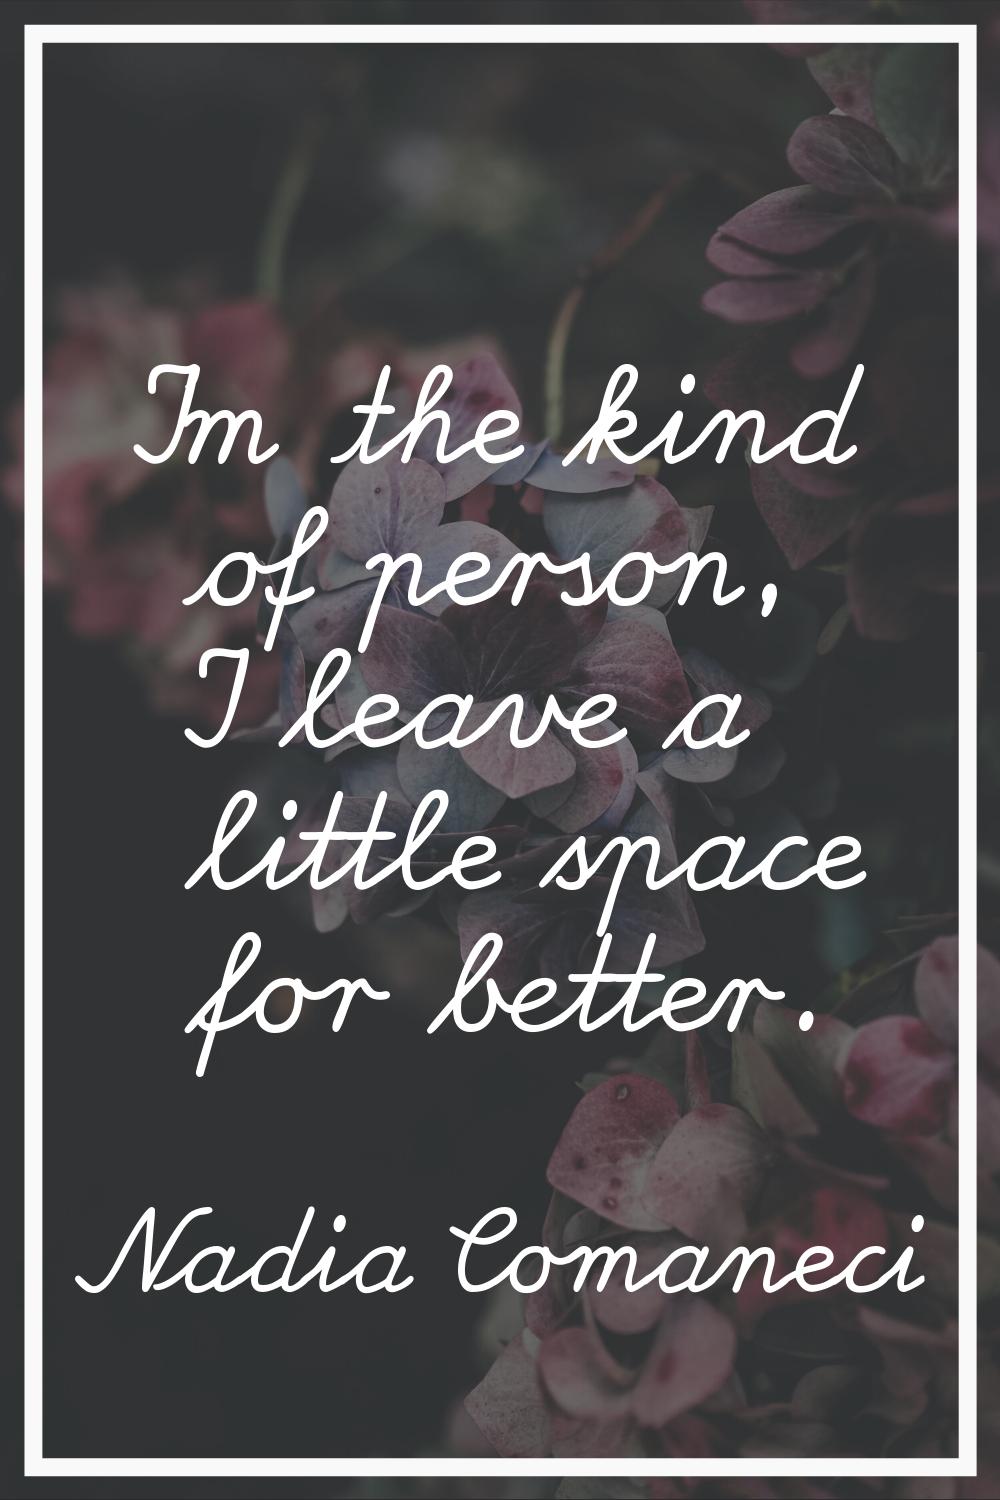 I'm the kind of person, I leave a little space for better.